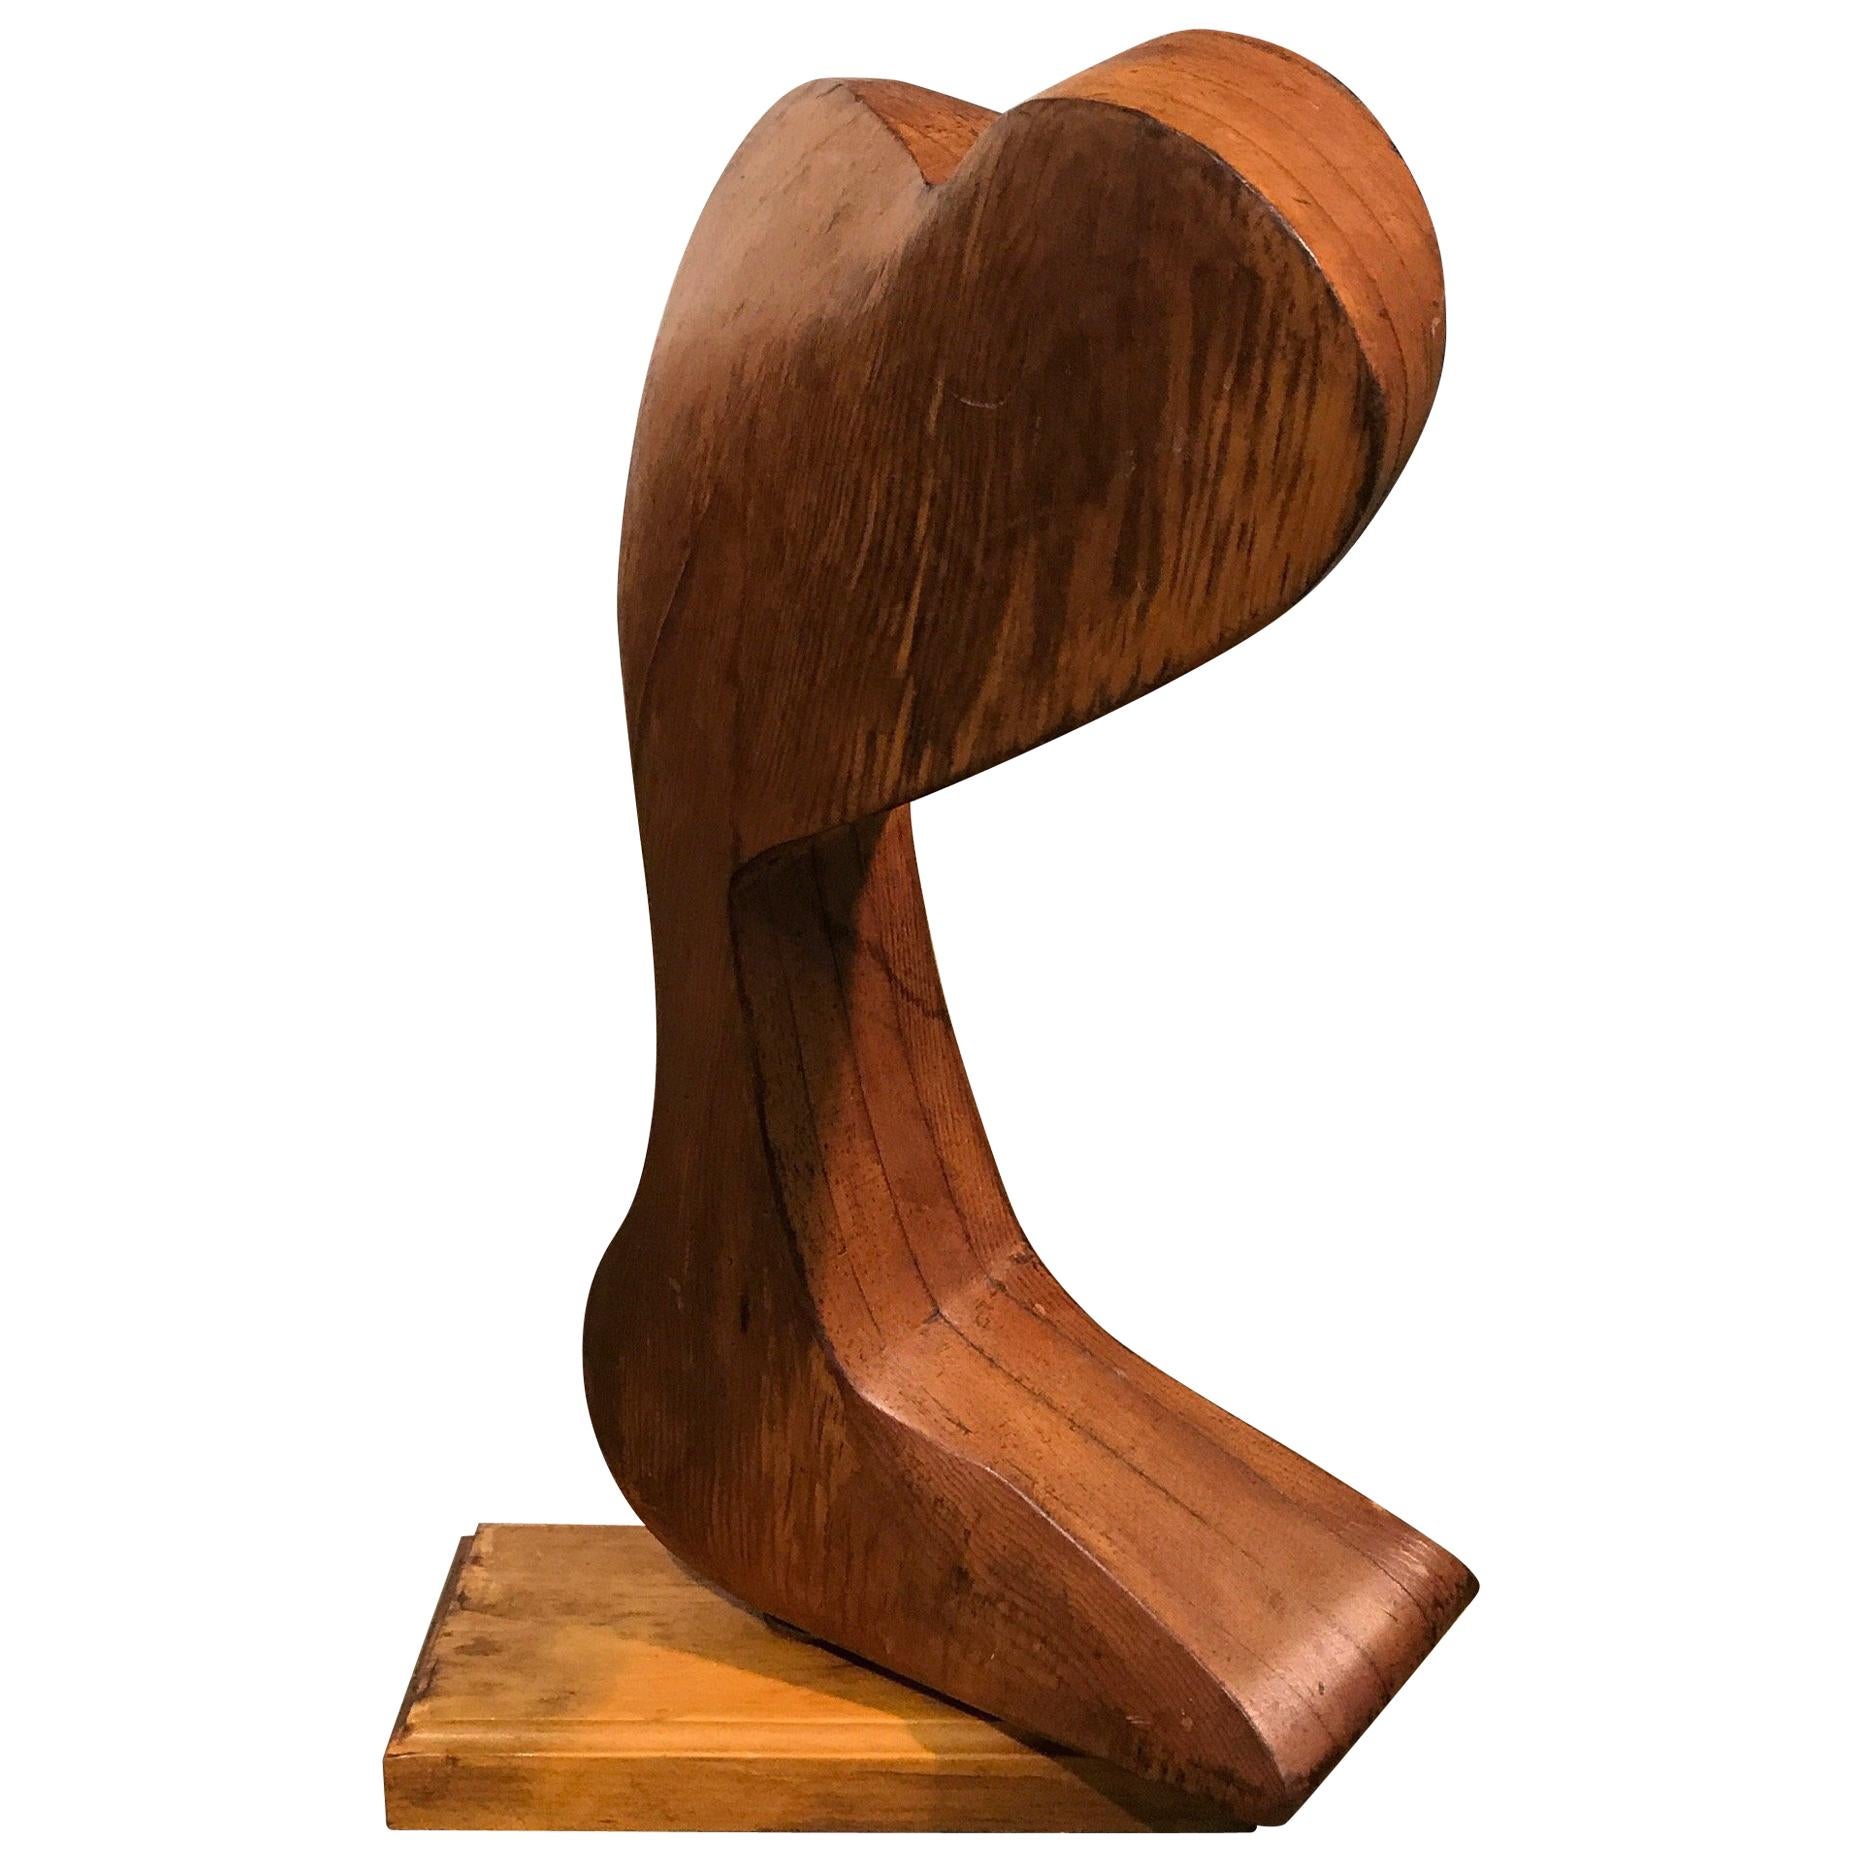 Early Modern Wood Sculpture Artist Signed L Ryan 1951, Rogue Wave, Vintage For Sale